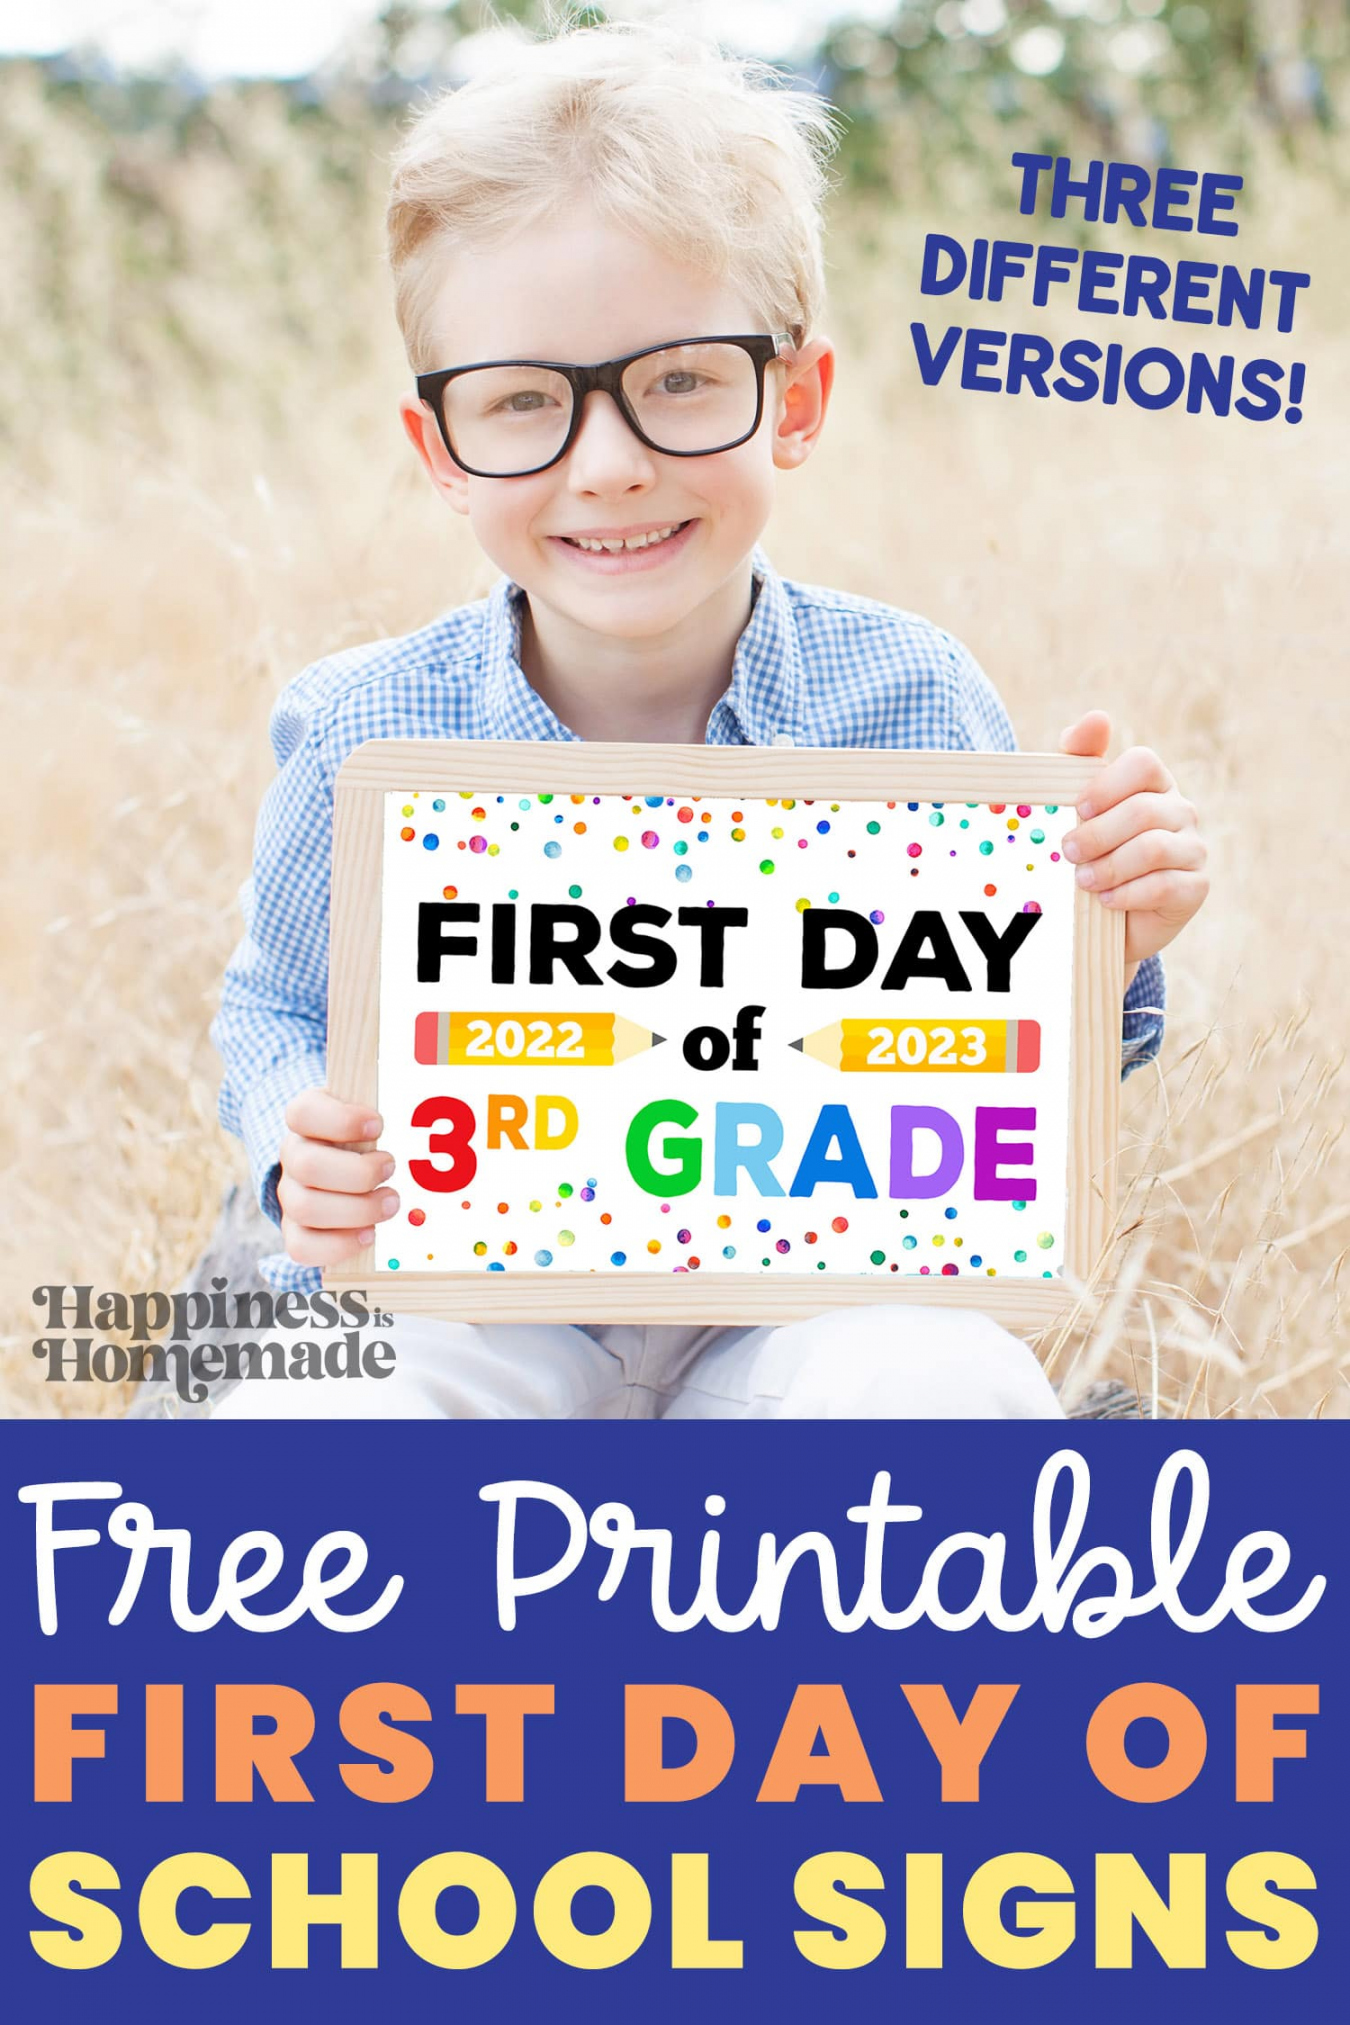 First Day of 3rd Grade Free Printable - Printable - Free Printable First Day of School Signs - - Happiness is